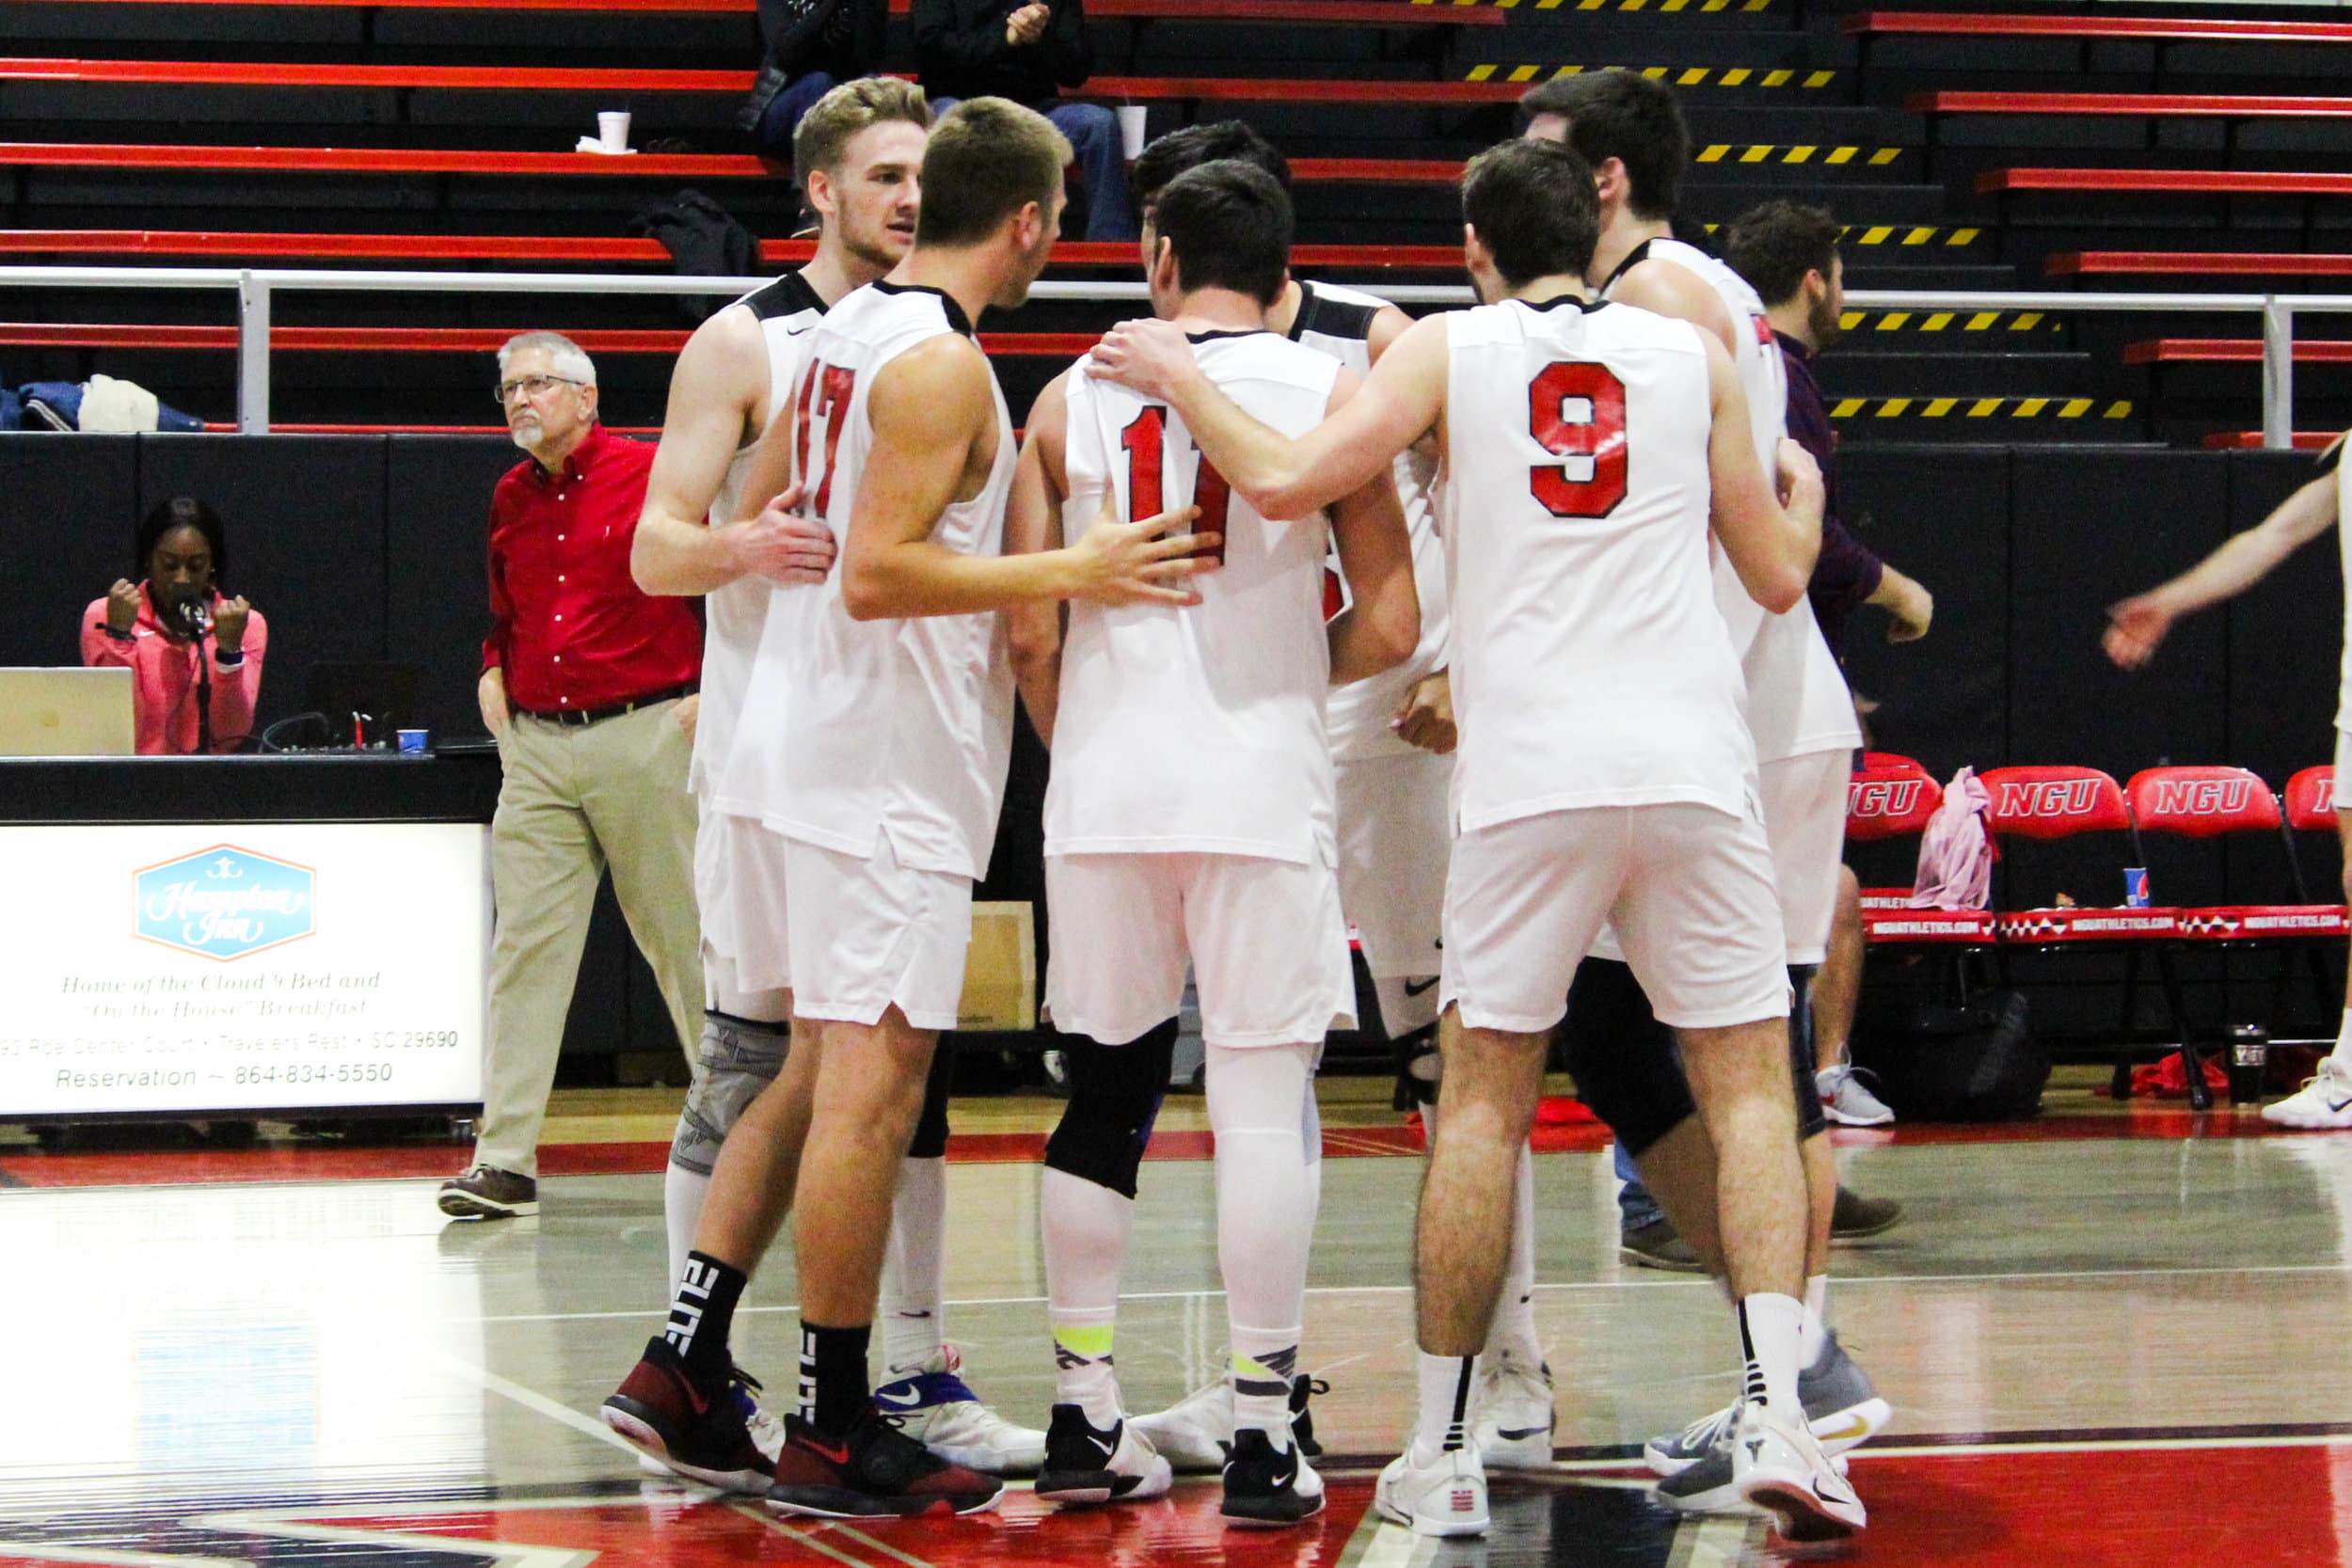 The NGU players congratulate one another after getting a point.